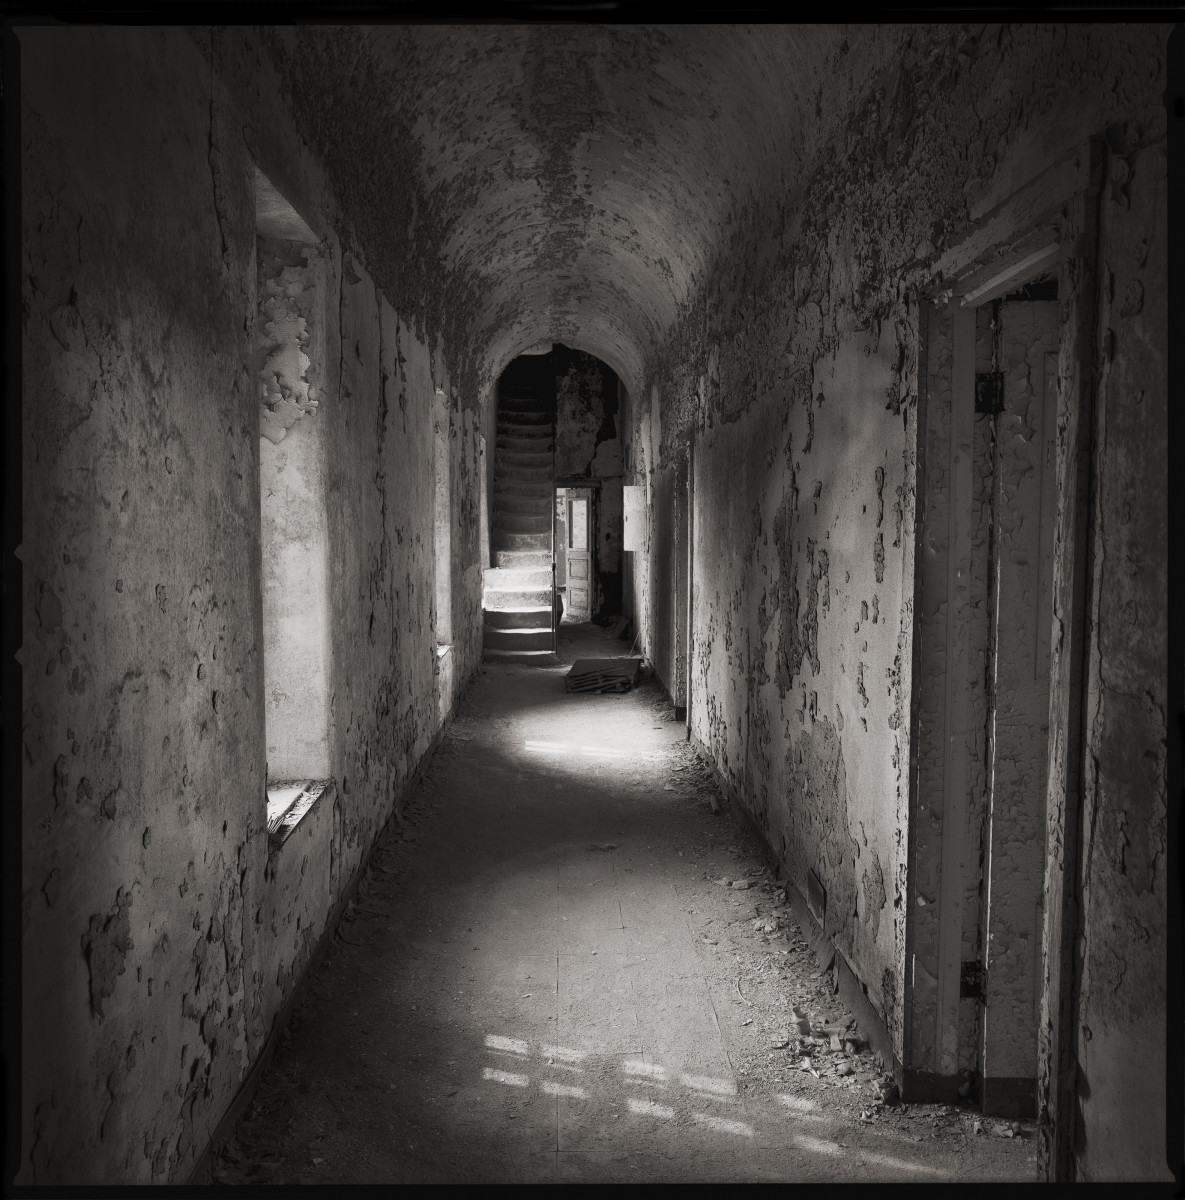 Warden's Corridor by Eric T. Kunsman  Image: ID: A black and white image shows a corridor with a curved ceiling and windows on the left wall.  There are doors on the right.  The walls and ceiling are cracking cement.